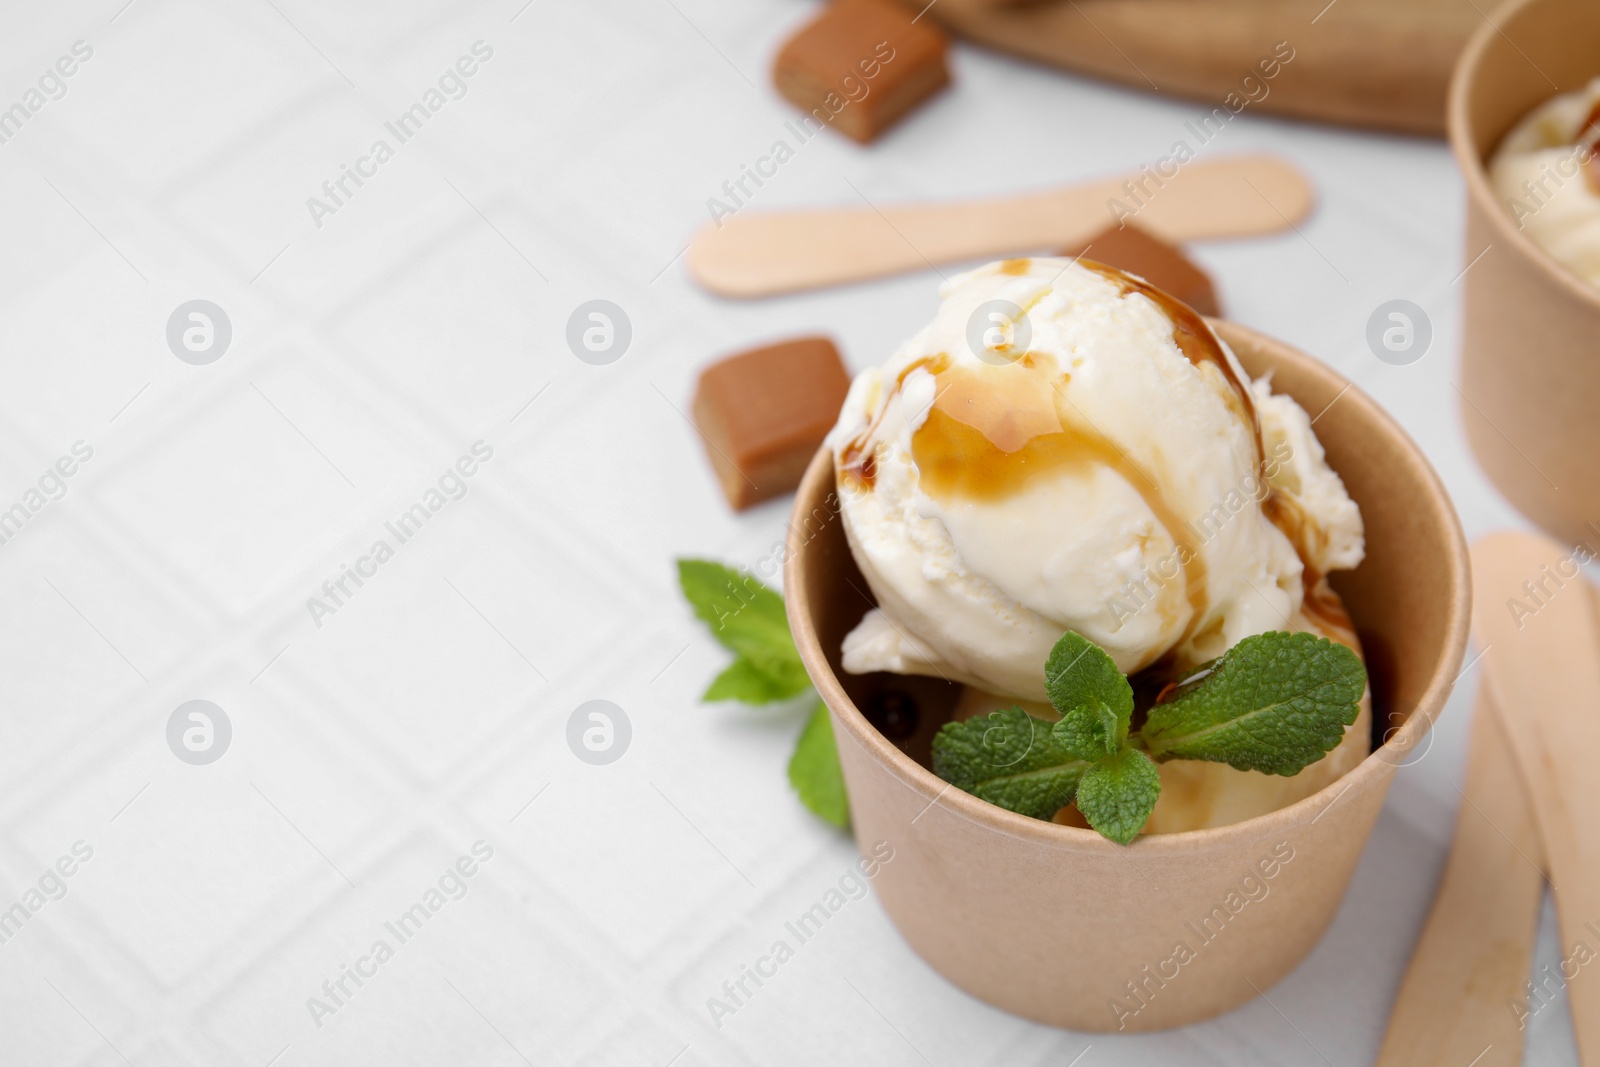 Photo of Scoops of ice cream with caramel sauce, mint leaves and candies on white tiled table, closeup. Space for text